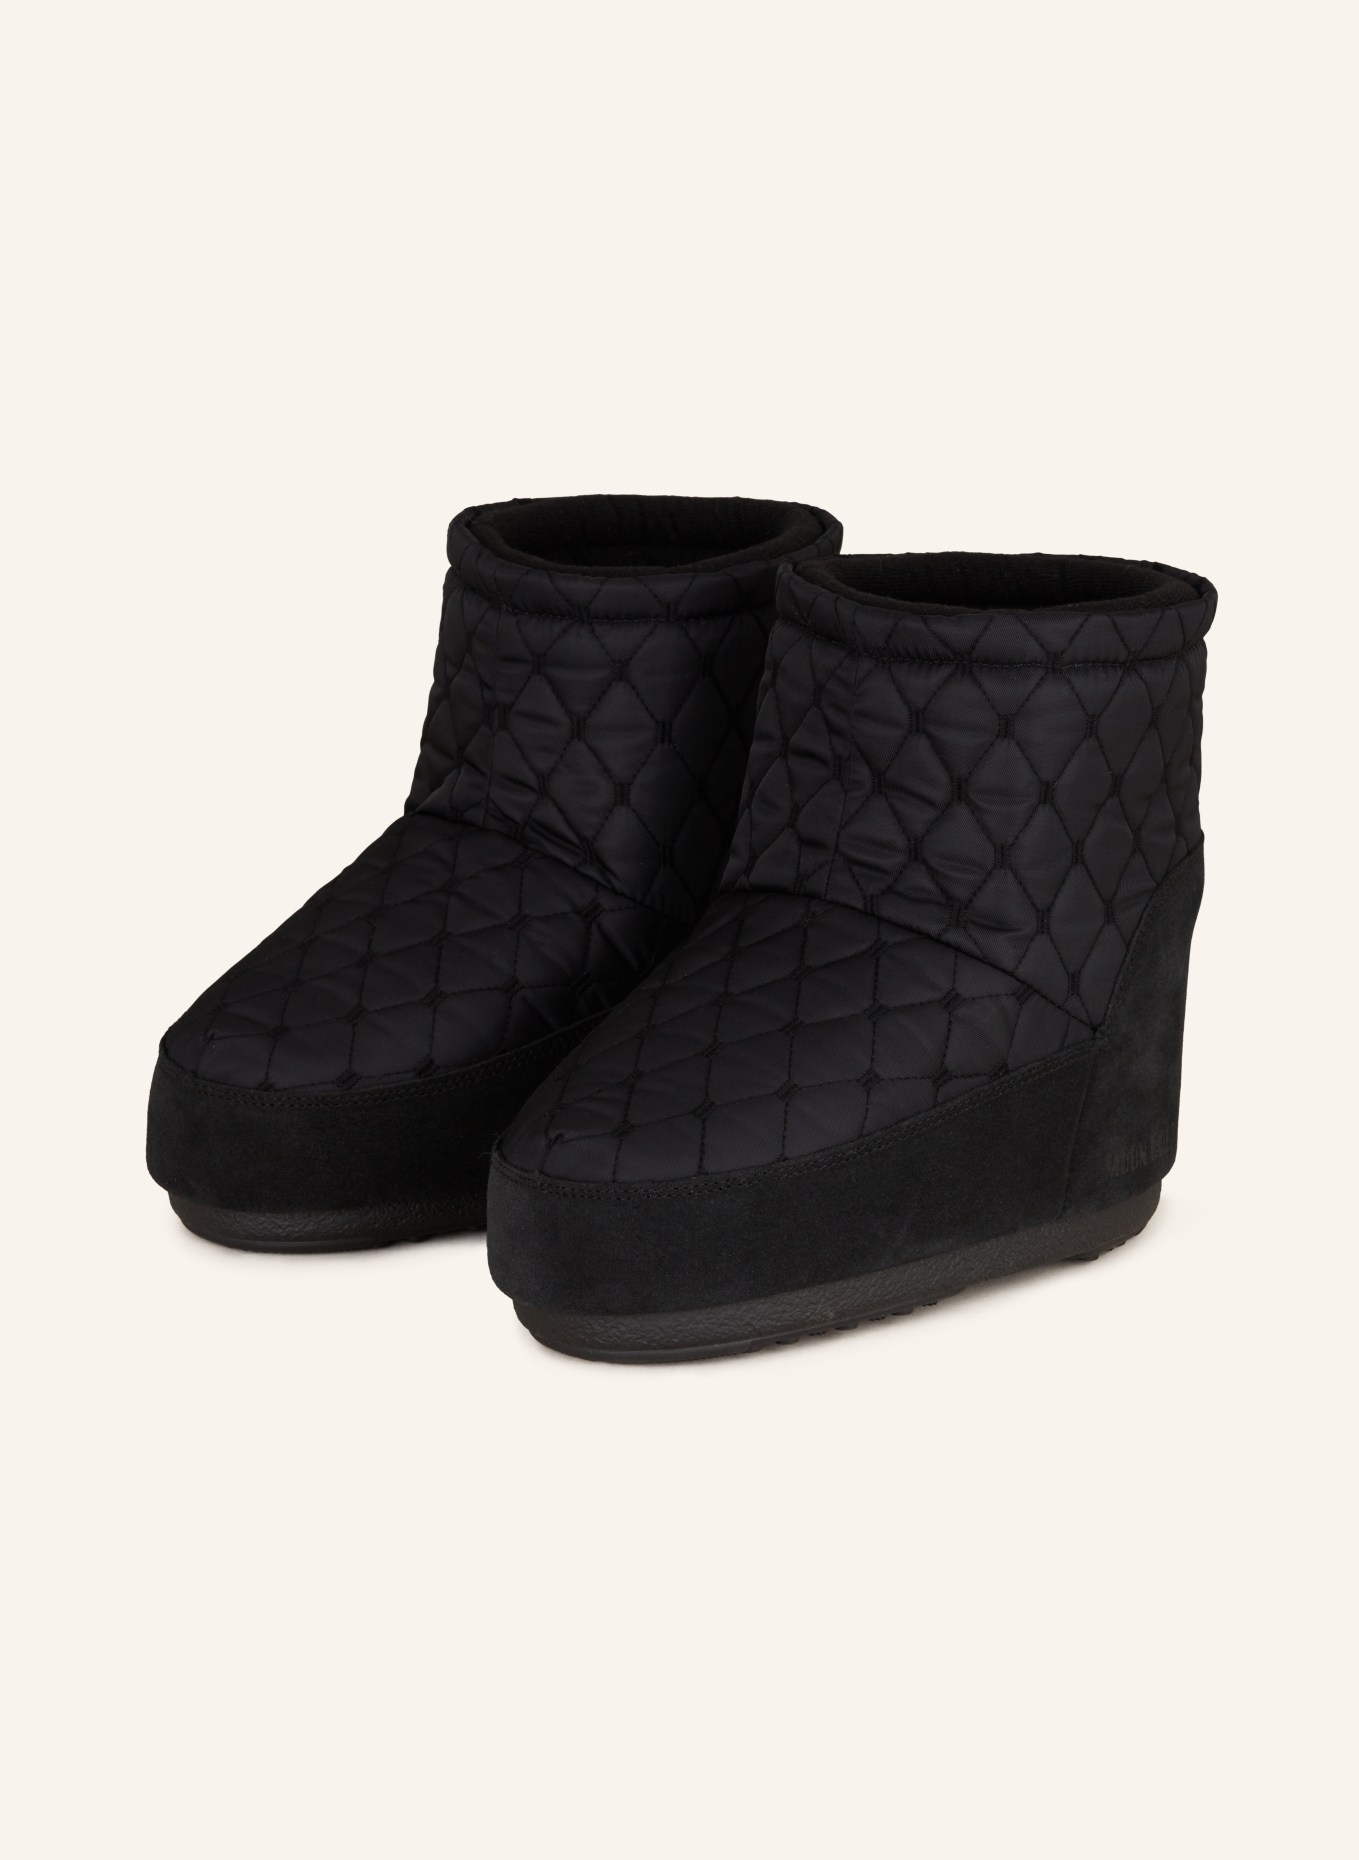 MOON BOOT Moon Boots ICON LOW NOLACE QUILTED, Farbe: SCHWARZ (Bild 1)